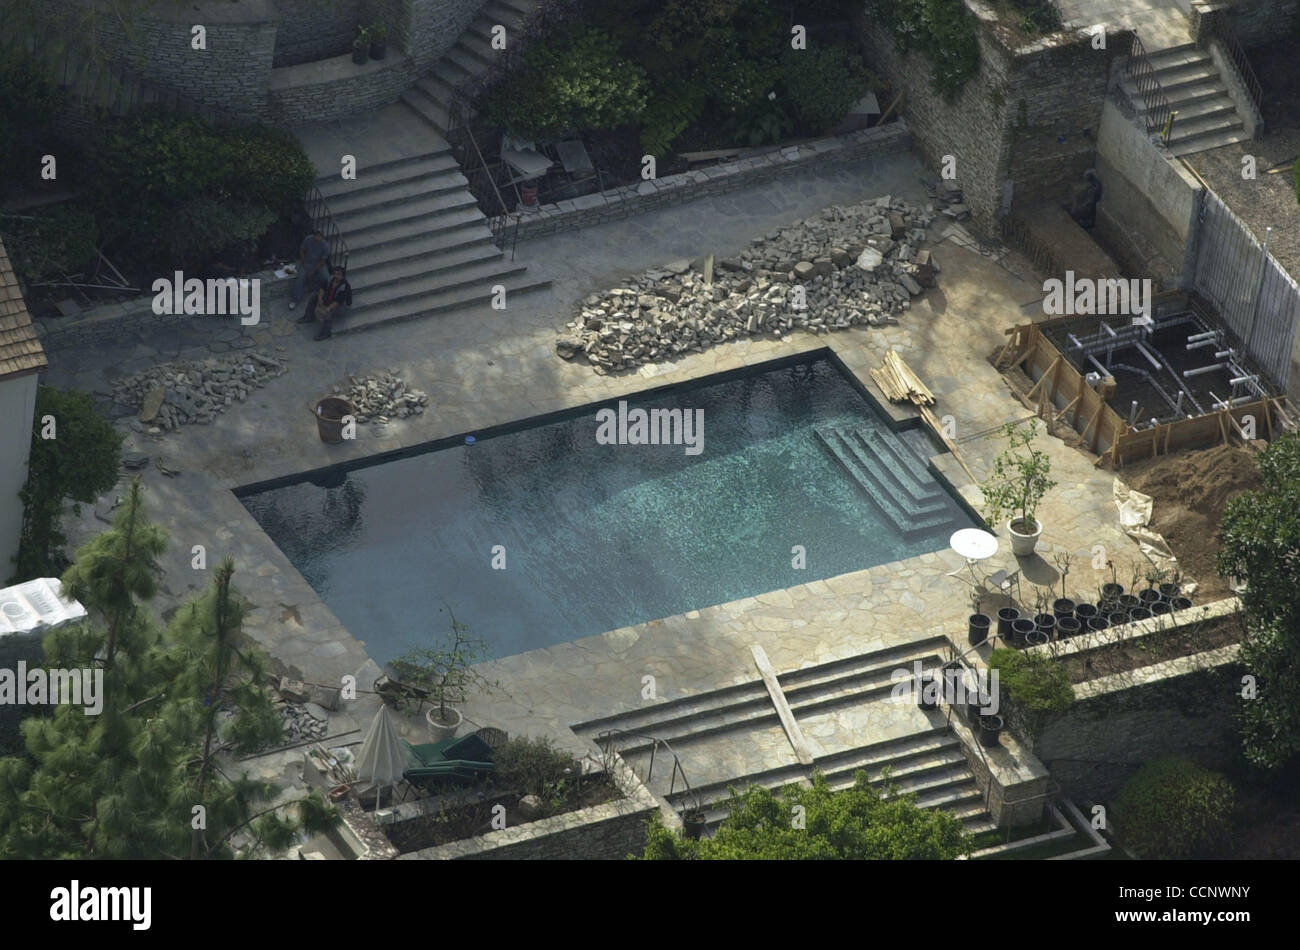 Jan 25, 2003; Beverly Hills, CA, USA; Work is underway on poolside spa at the 3.5 million mansion of actors Brad Pitt and Jennifer Aniston. Pitt recently filed new plans with Beverly Hills city officials for a second-story gym and they are also adding an octangular skylight in the master bedroom. Stock Photo